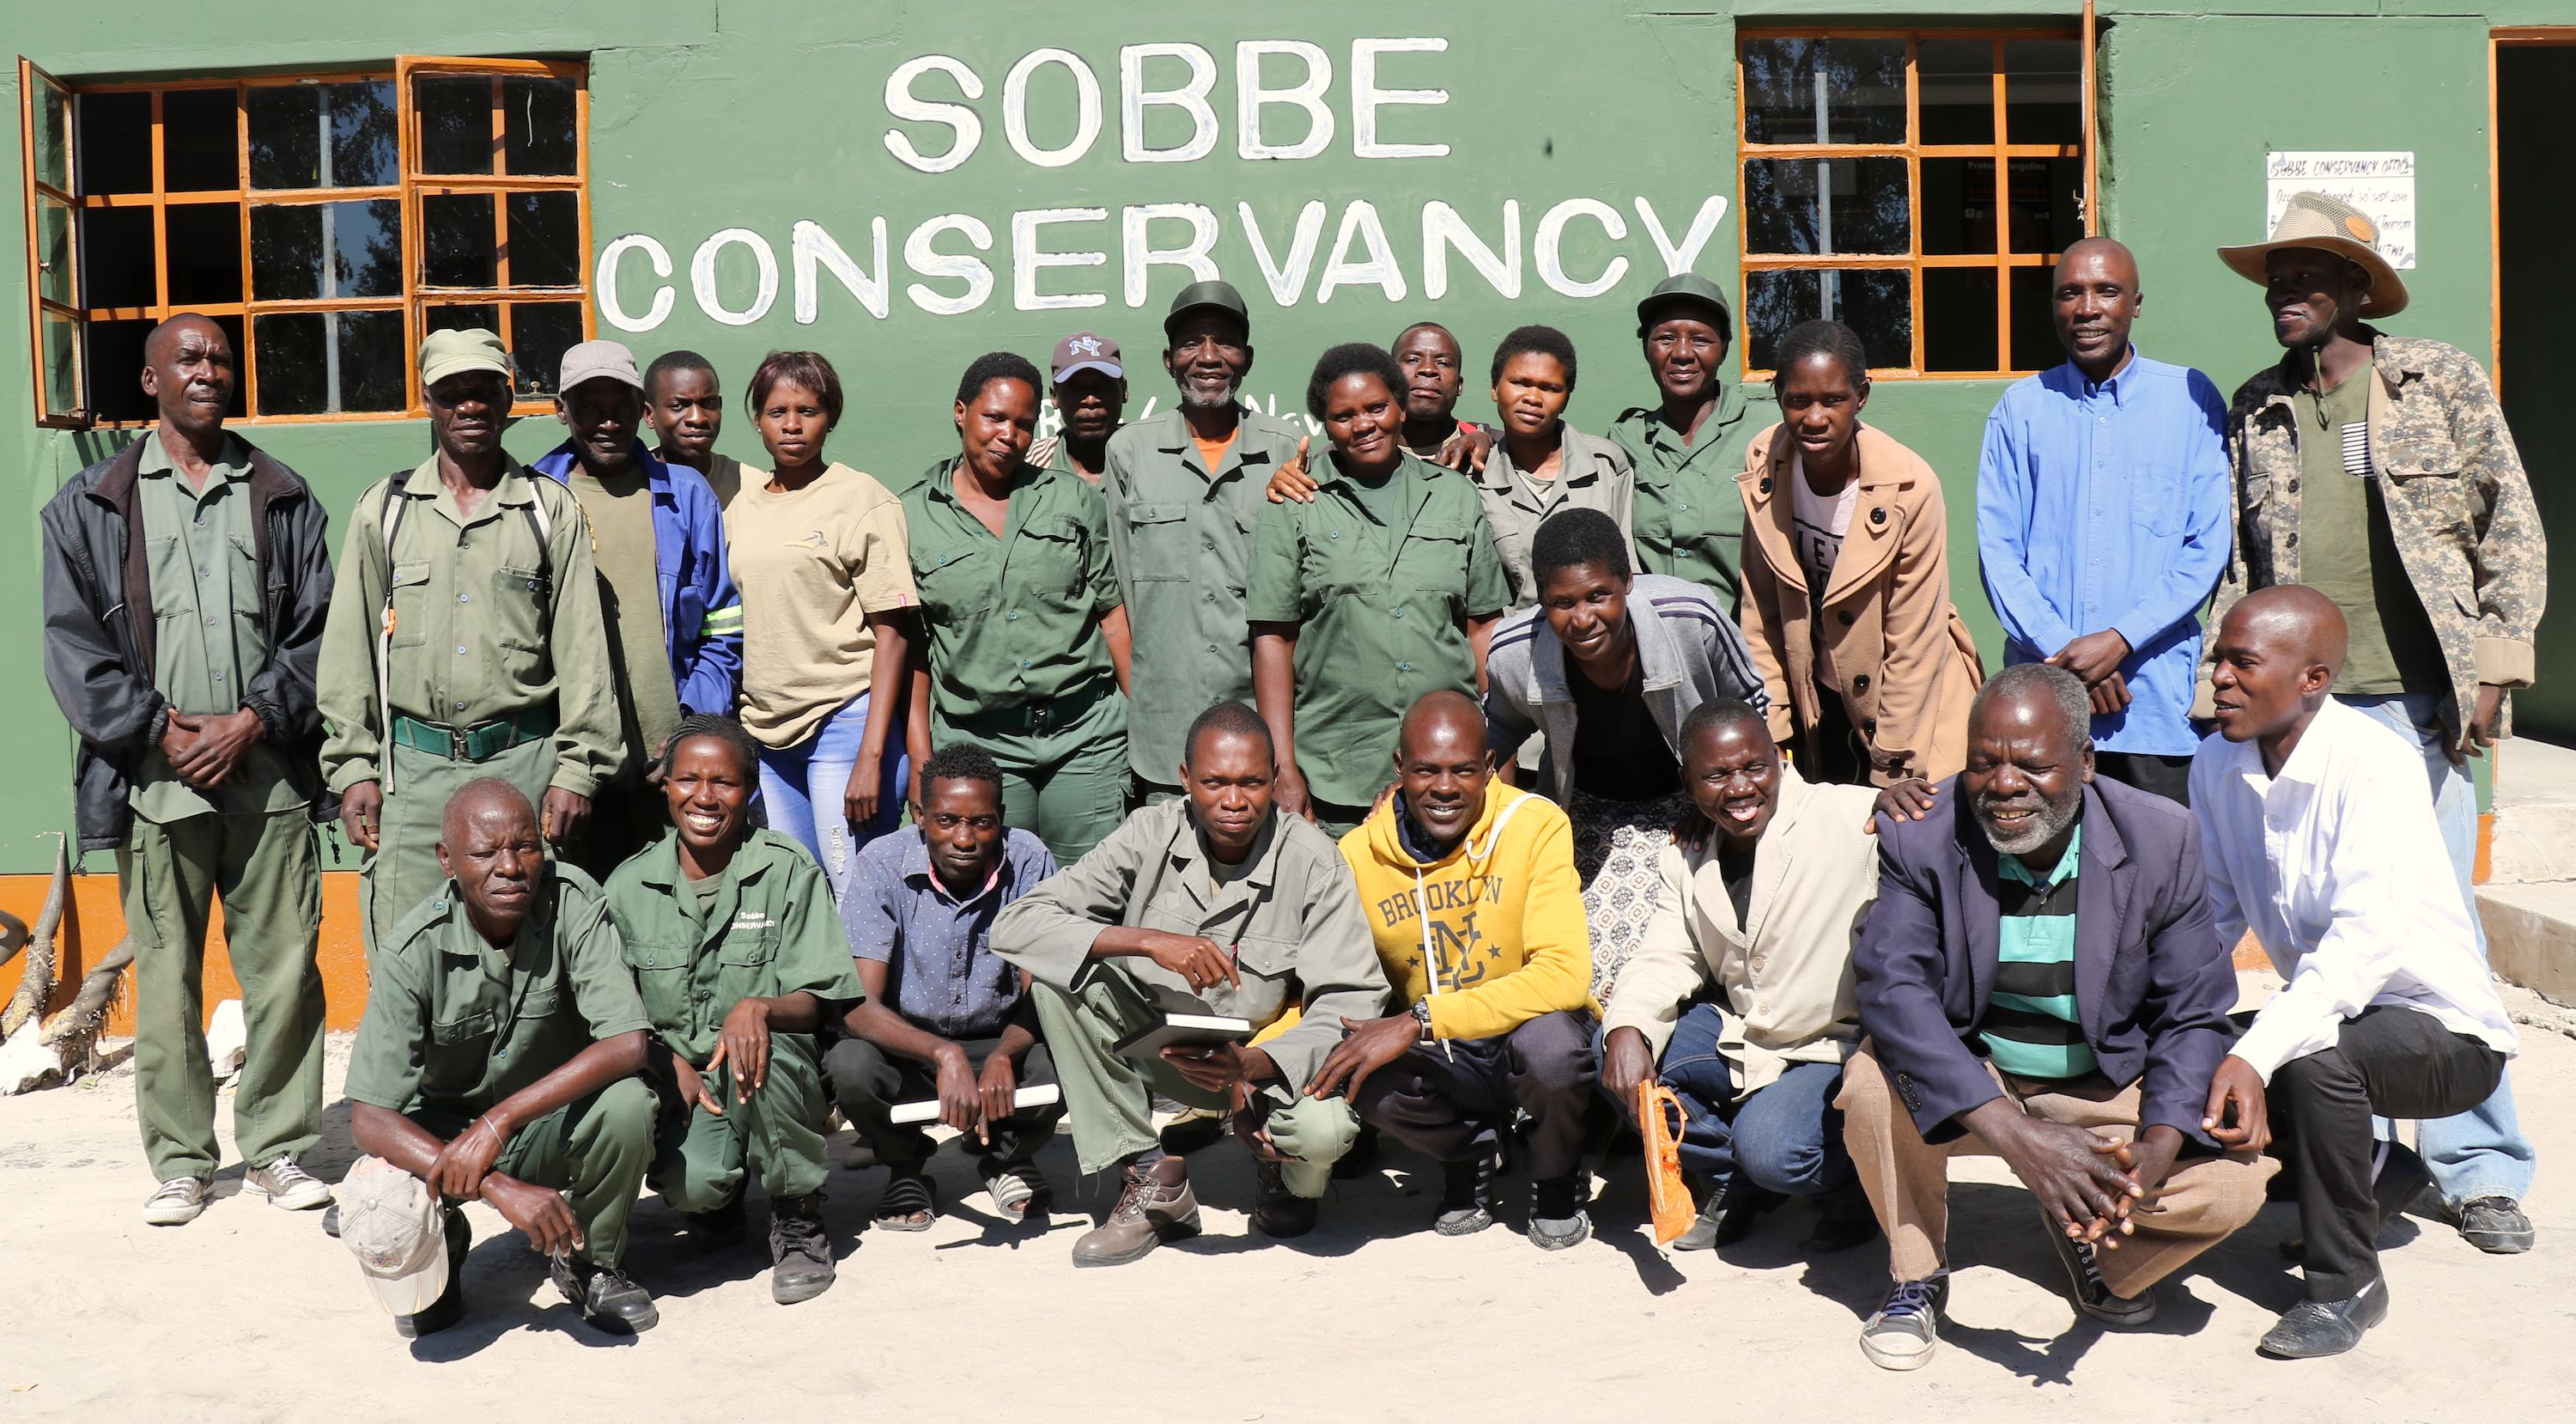 A group photograph showing the men and women of the Sobbe Conservancy committee posing outside of their office.